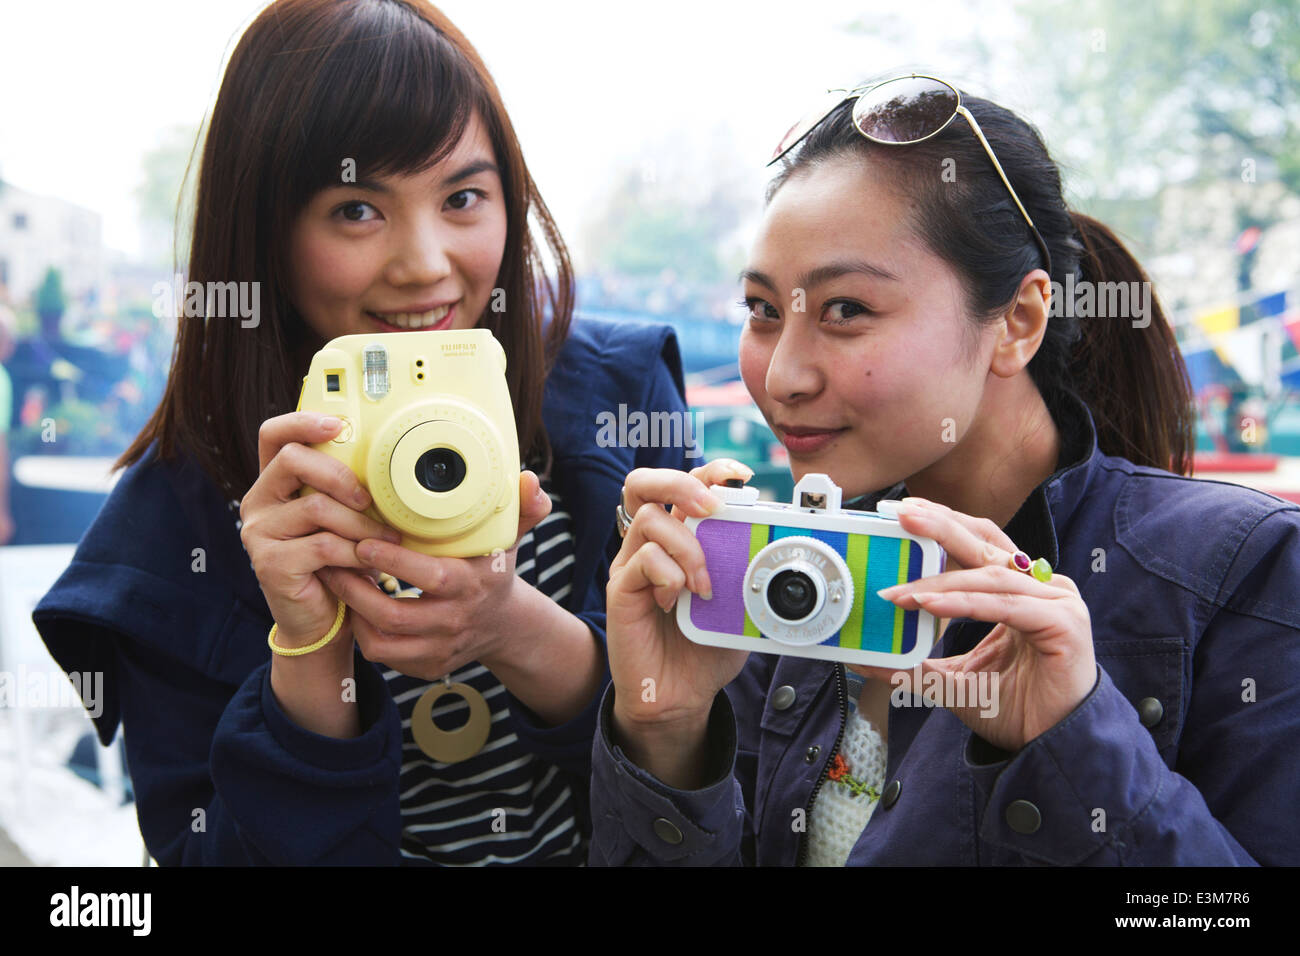 Two Asian female young adults holding retro camera cameras. People with cameras. Stock Photo